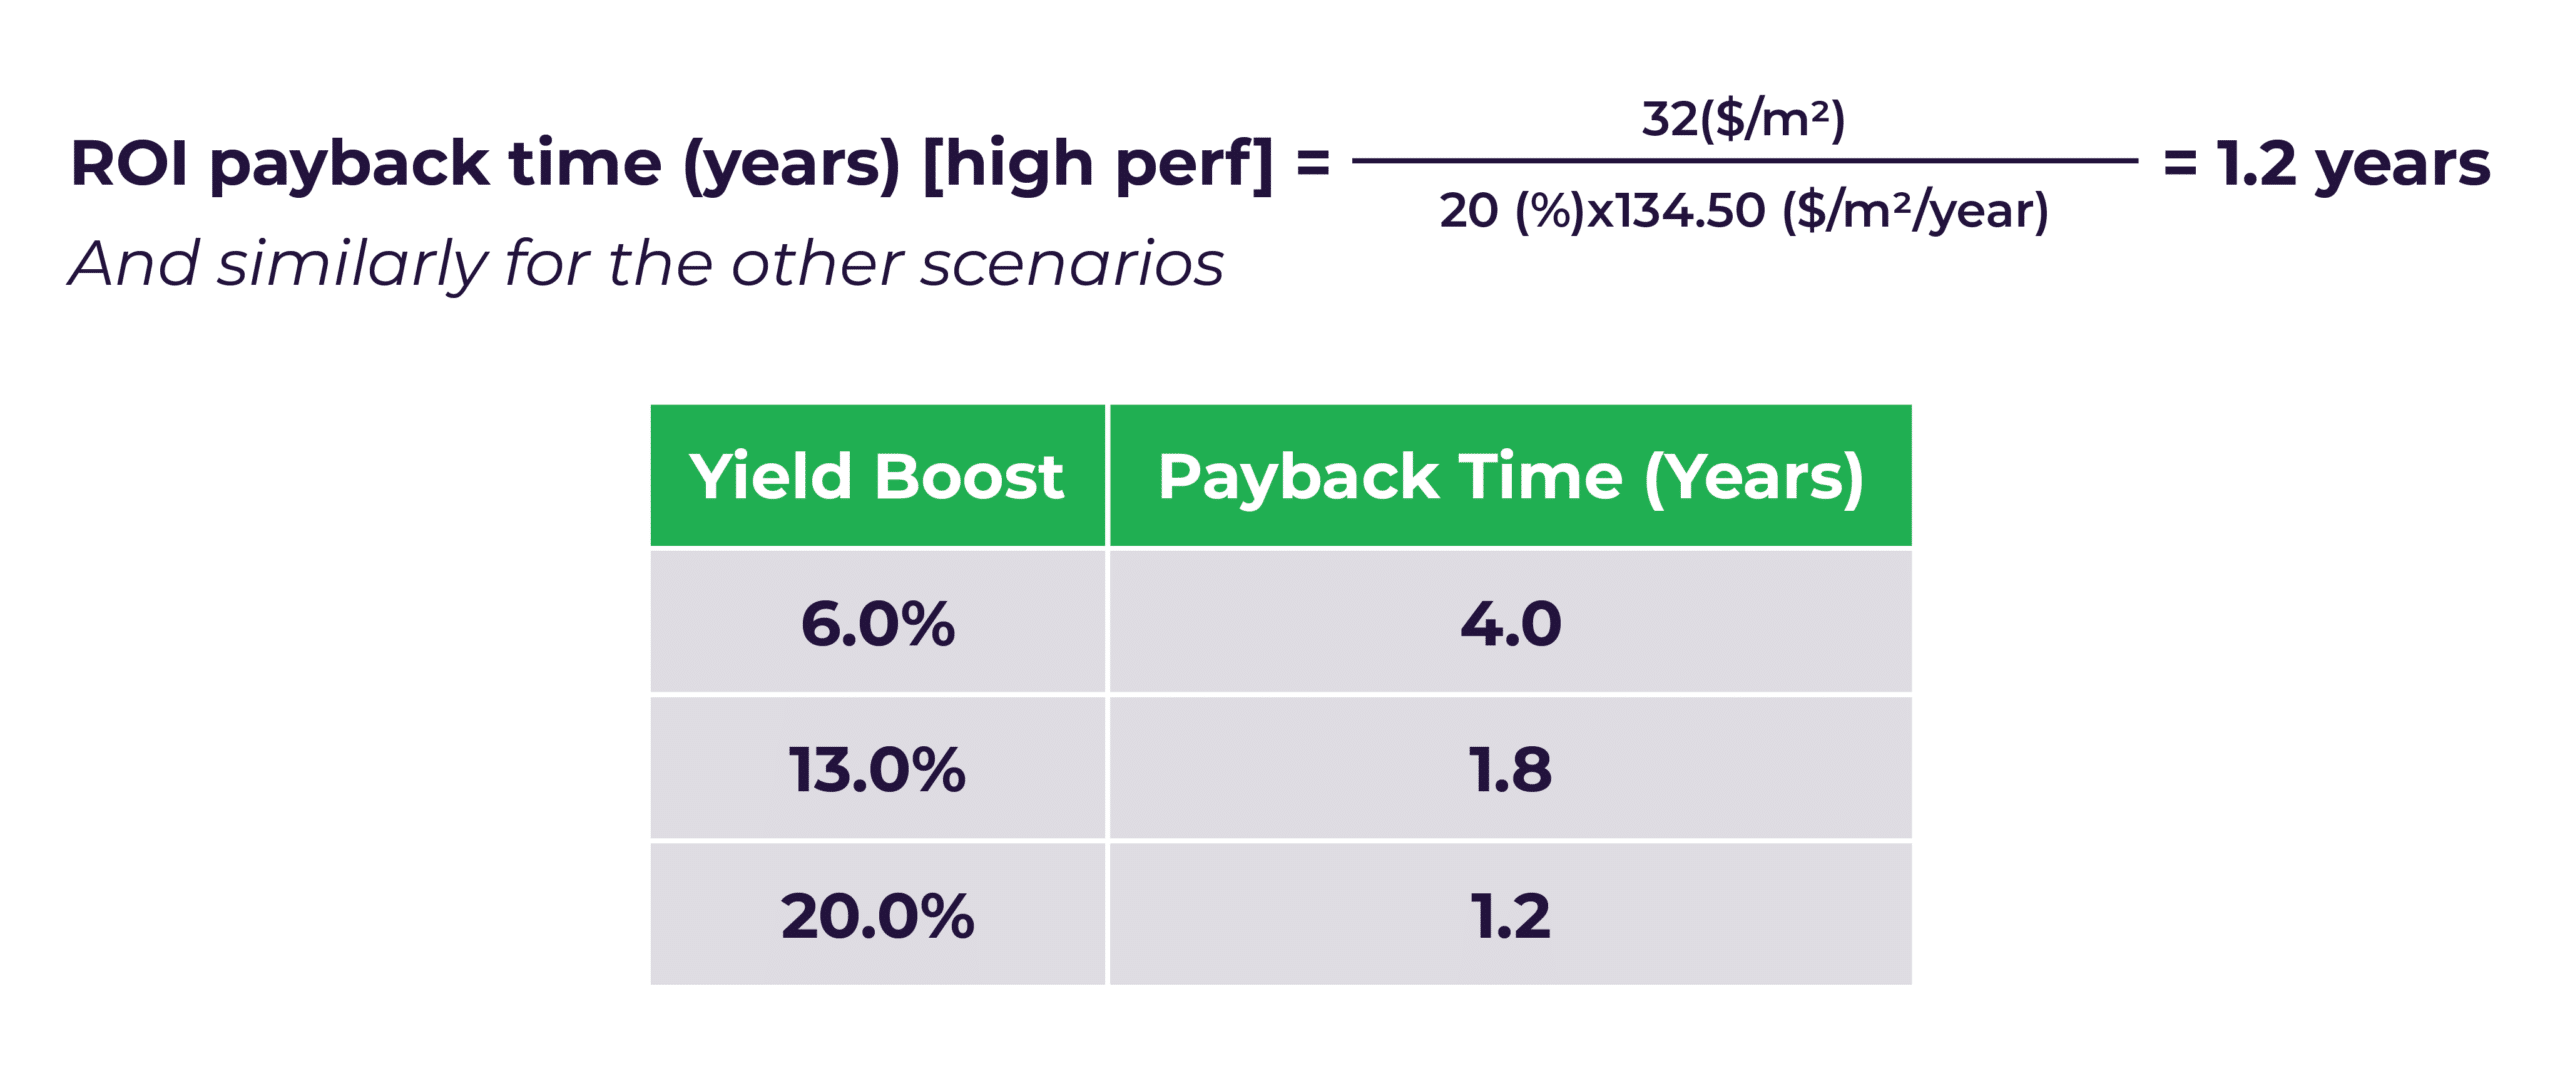 Calculating The Return On Investment Payback Time For Yield-Enhancing Technologies